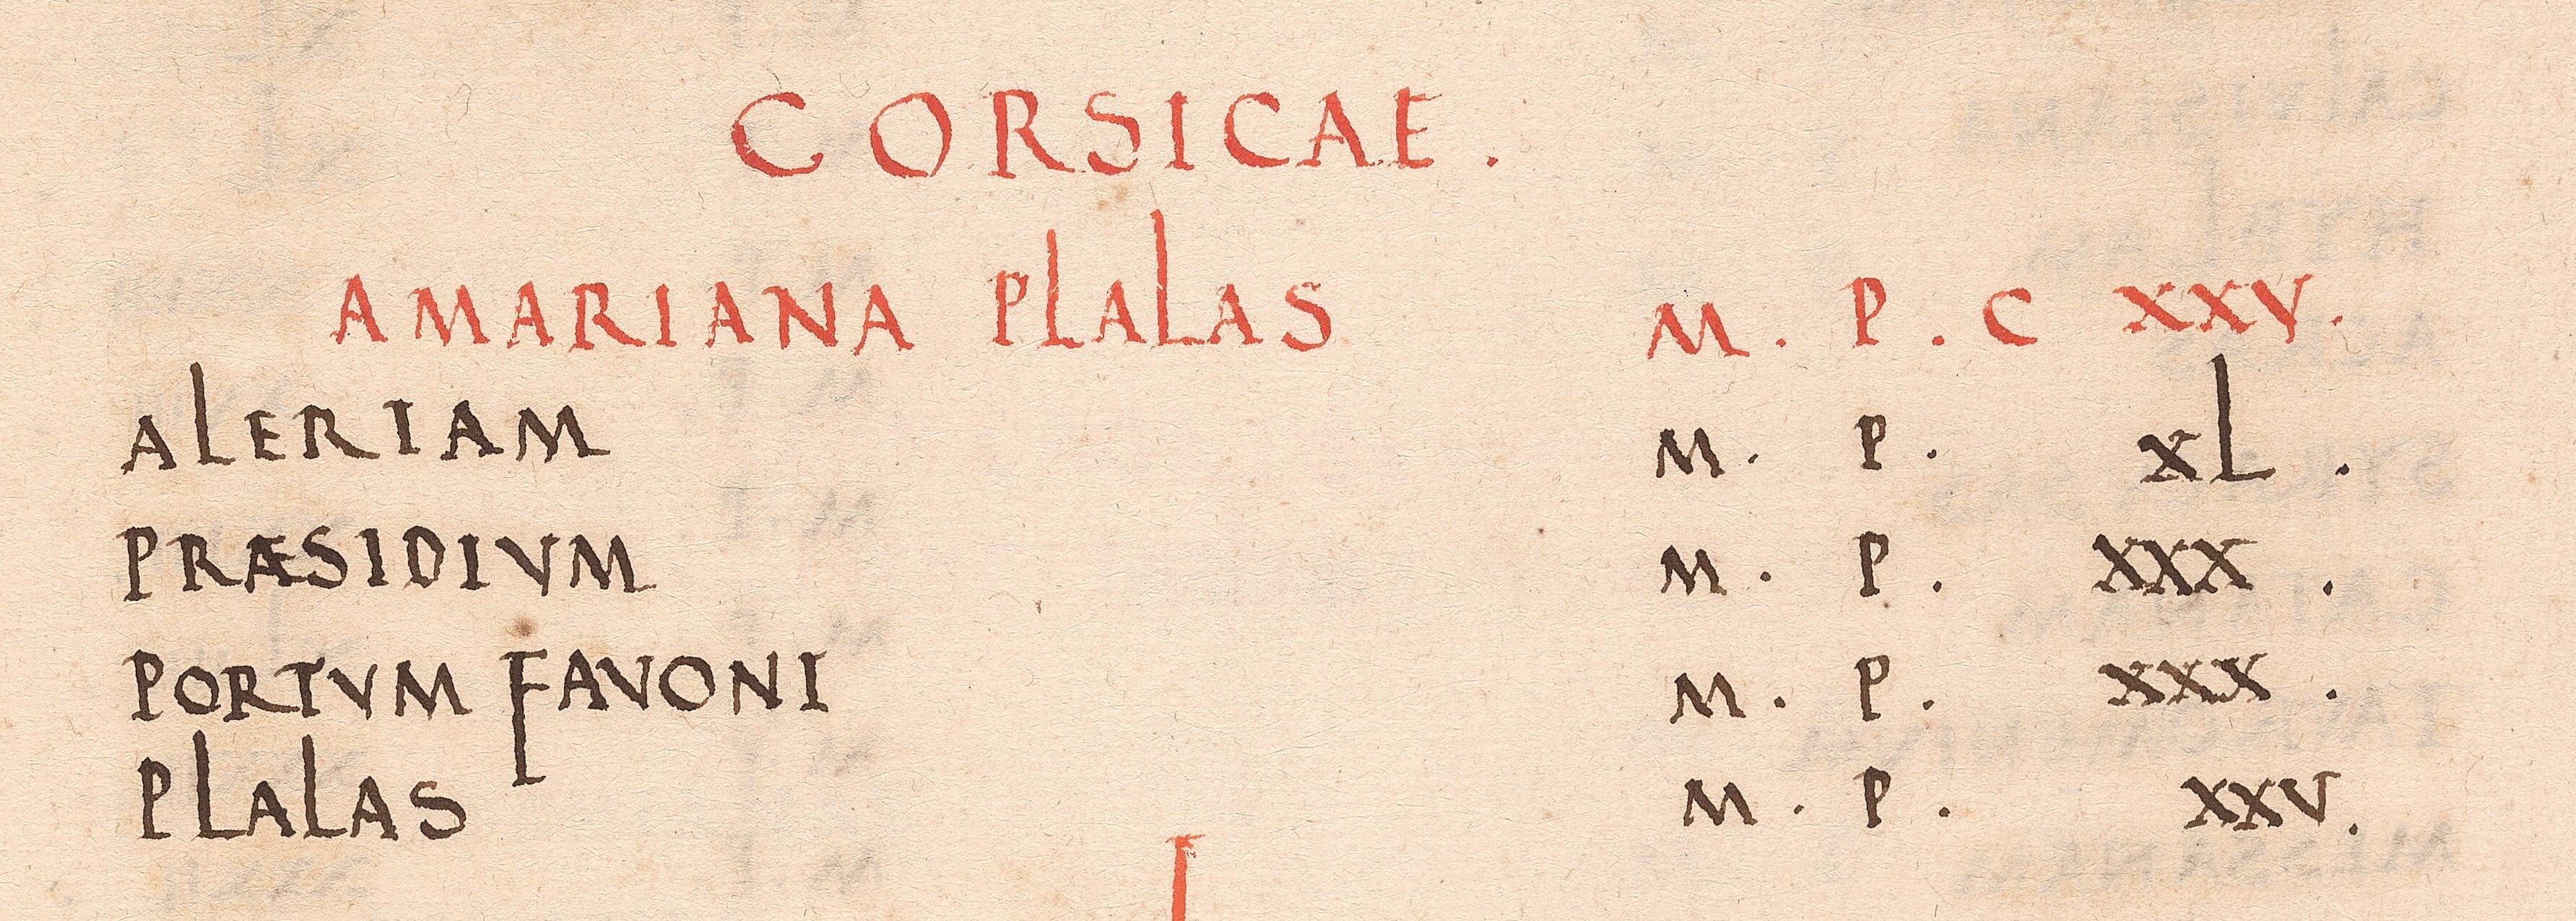 Detail of a list of places and their distances on Corsica. It is written in black ink, with red headings. 